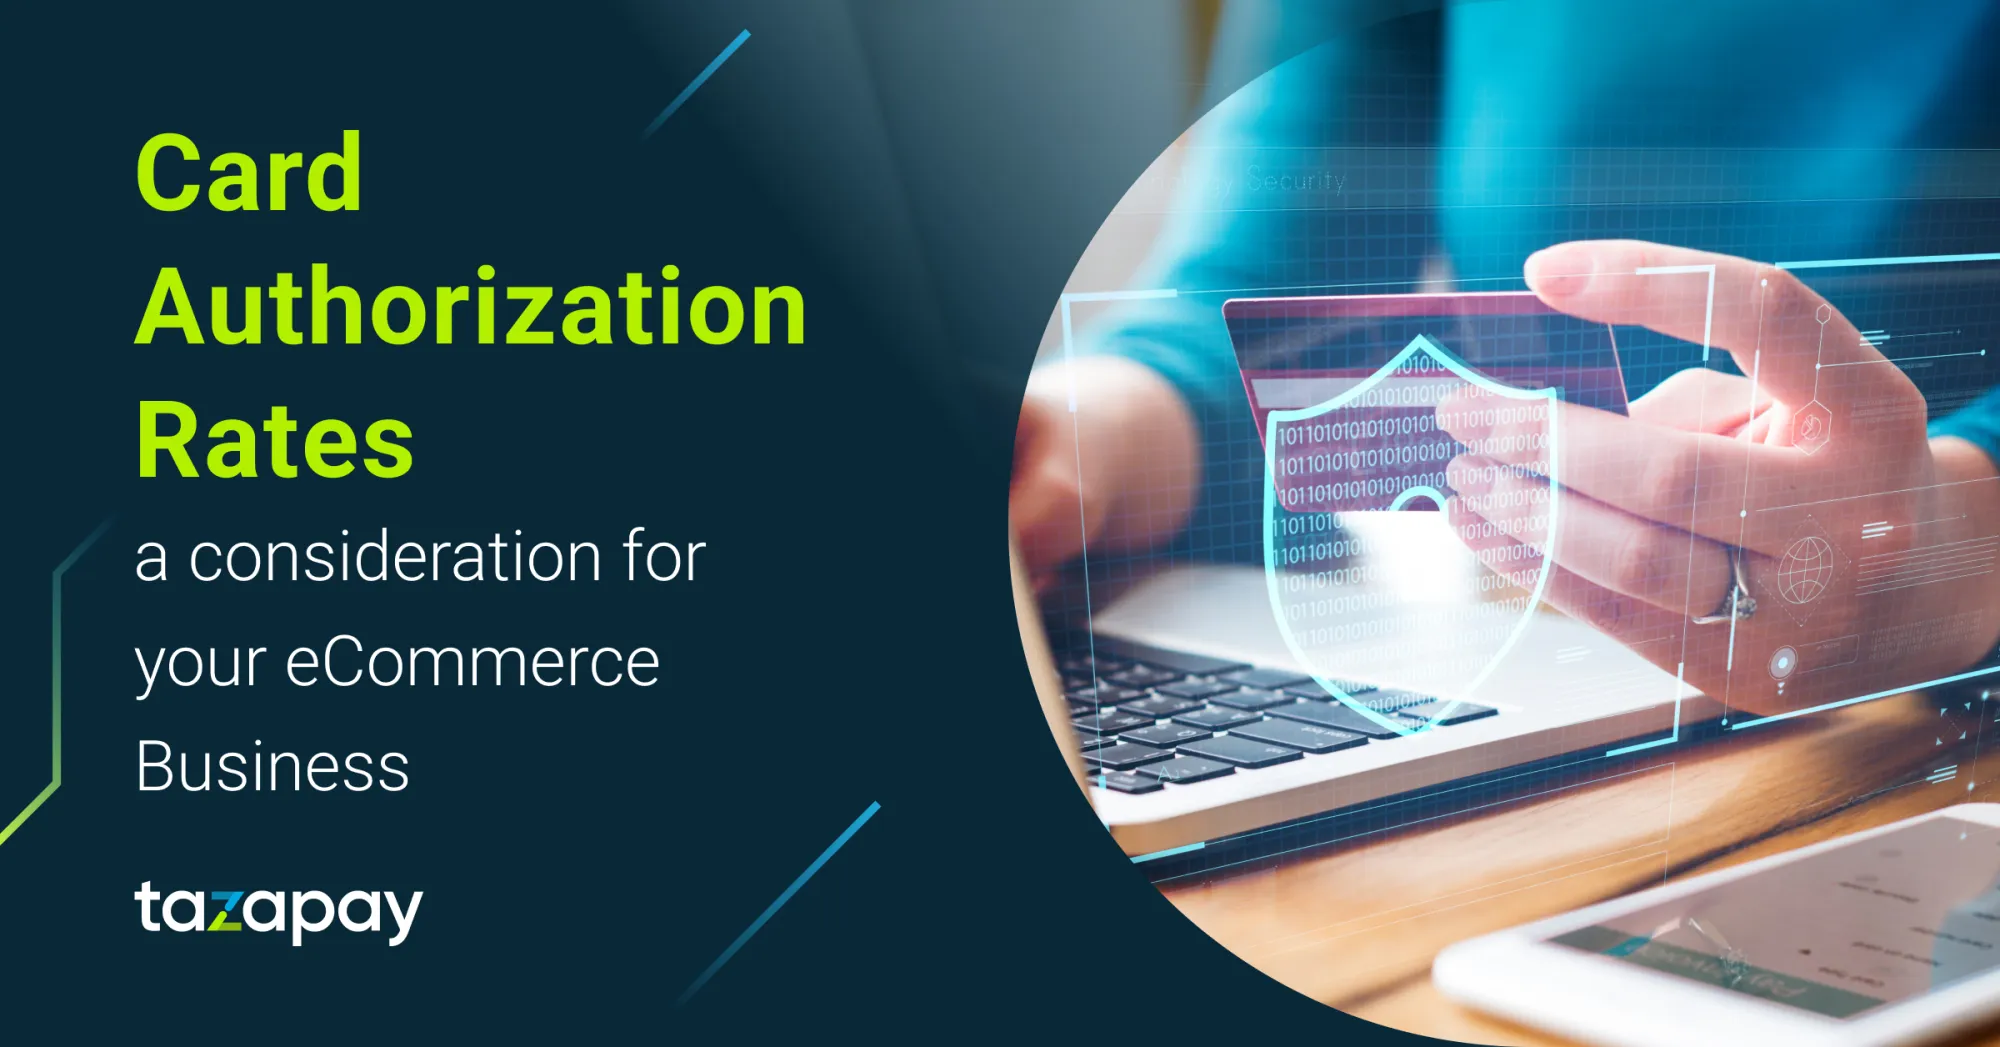 Card Authorization Rates: a Consideration for Your eCommerce Business's Payment Gateway